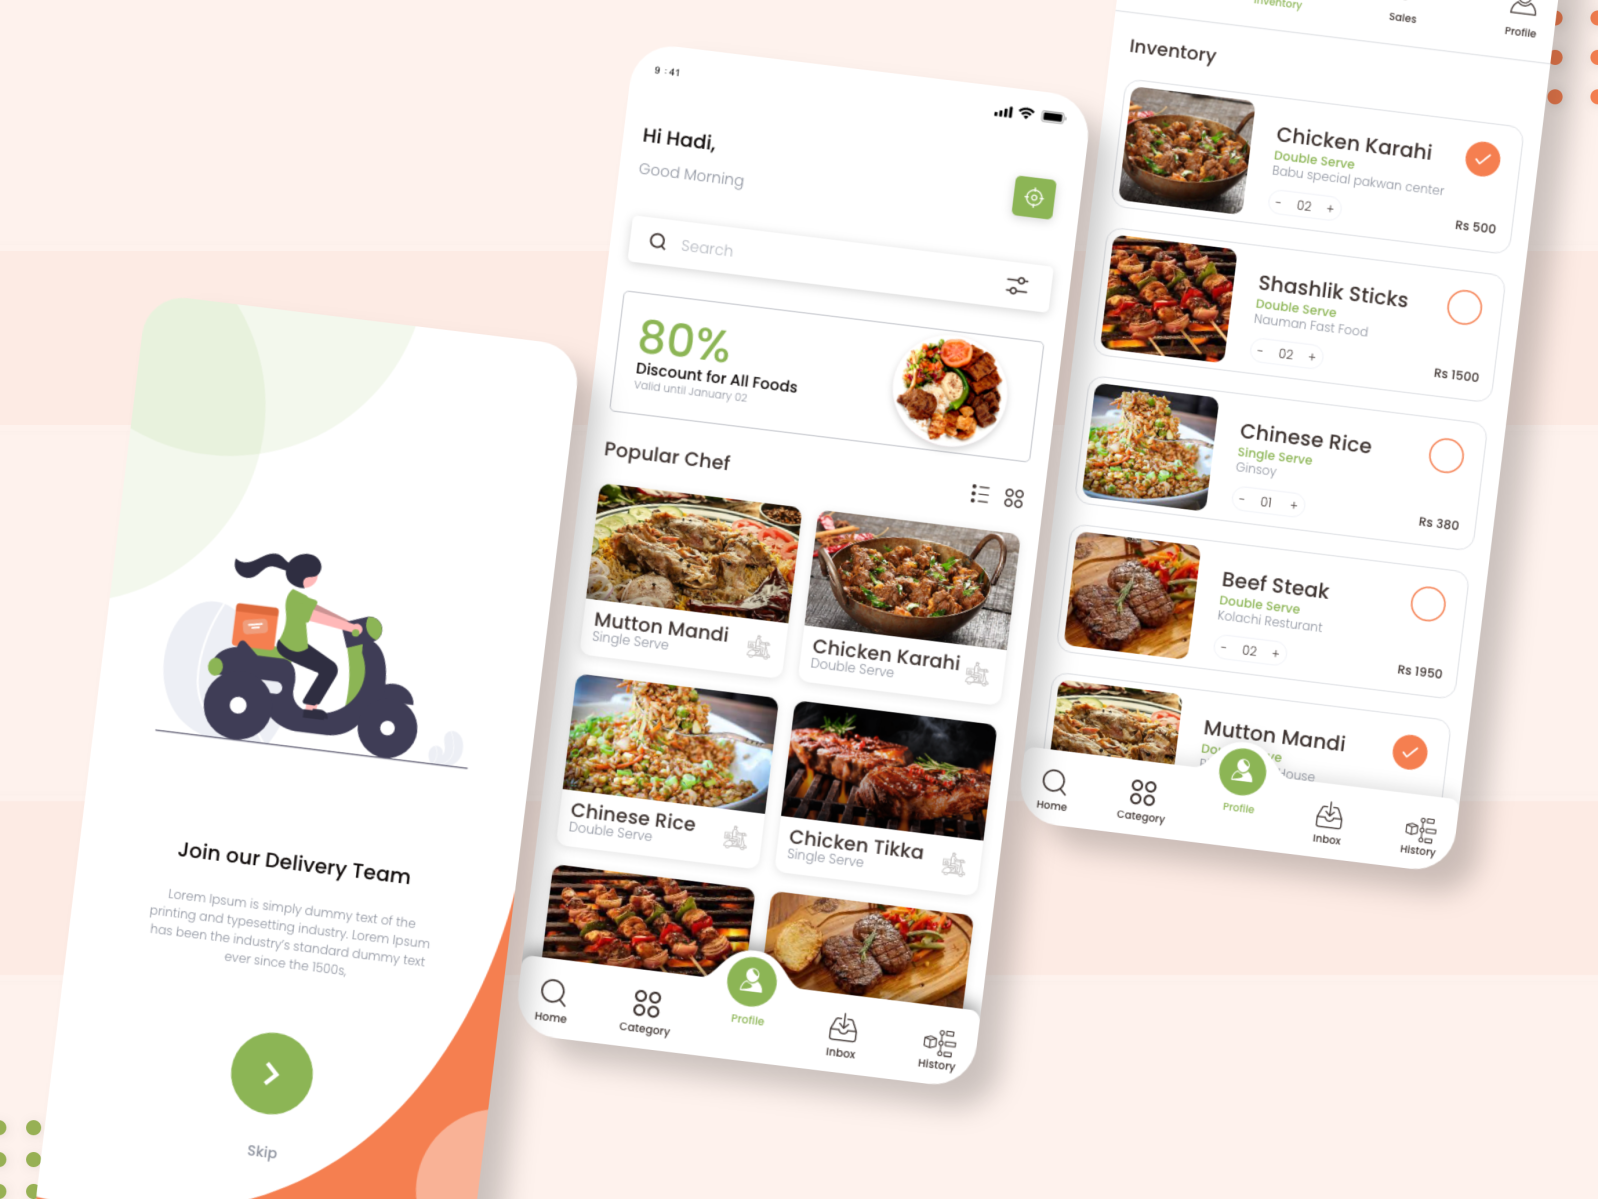 Food Delivery App UI Design by hadi hassan on Dribbble